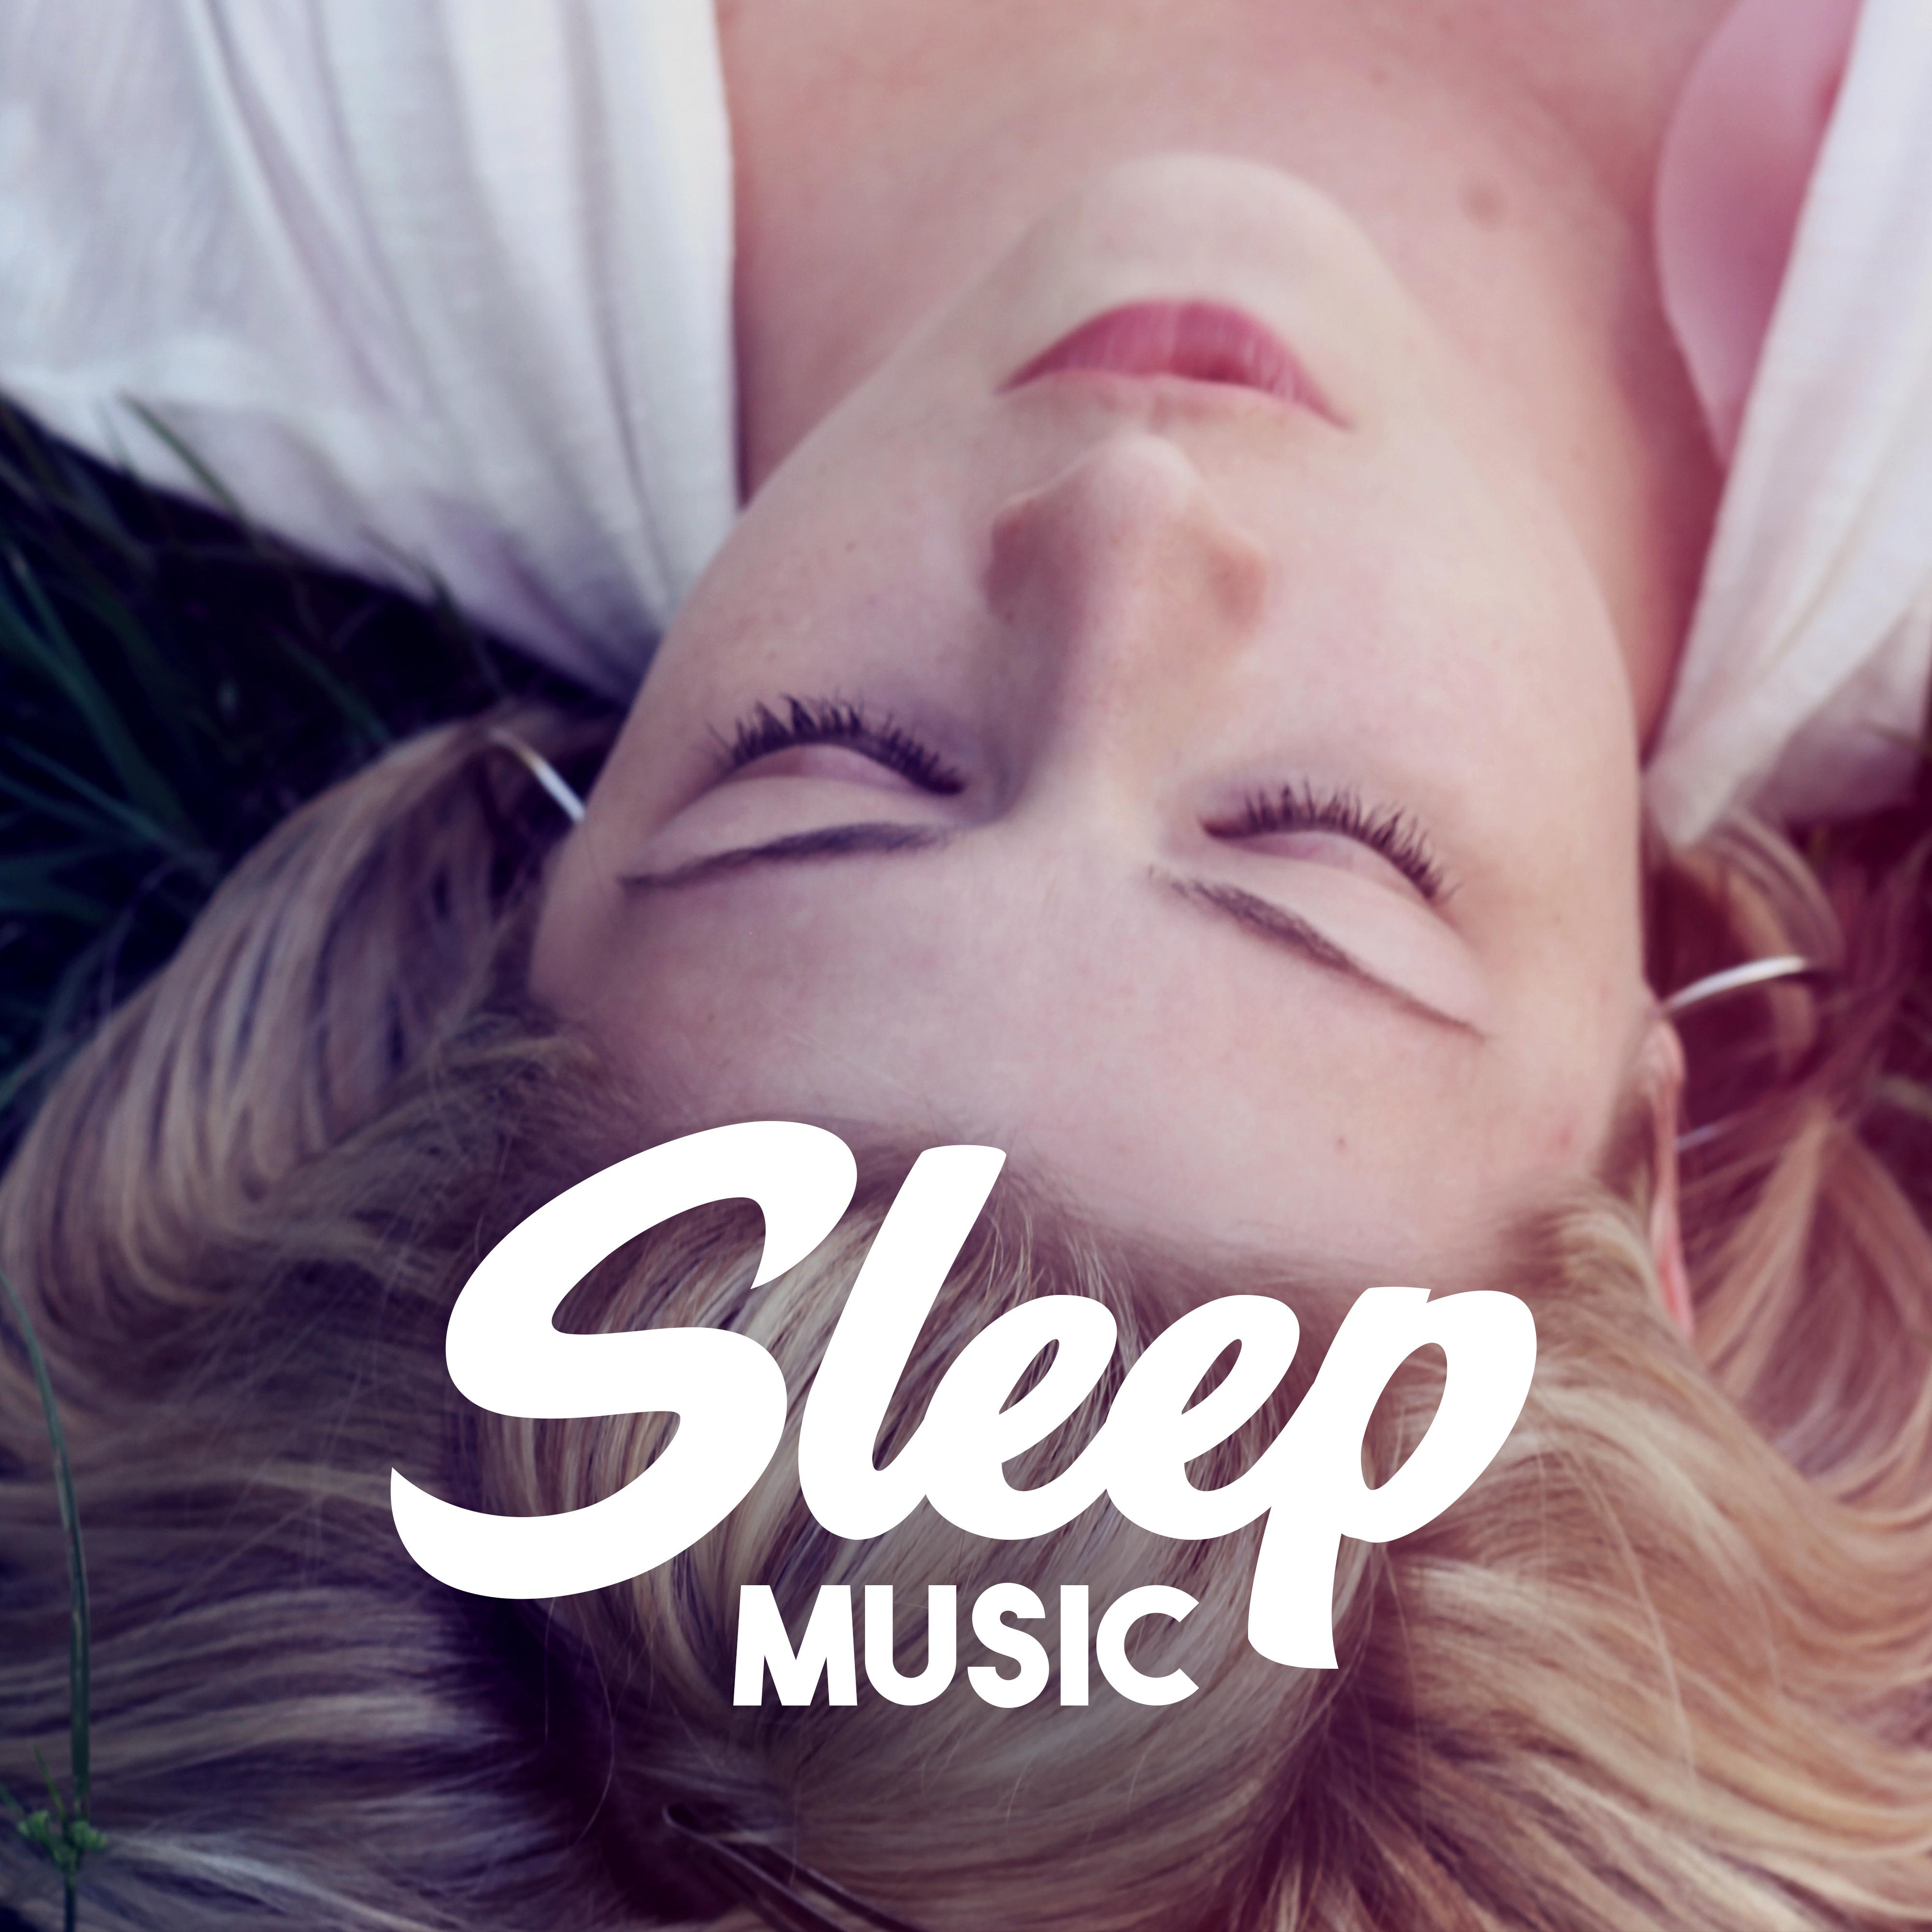 Sleep Music – Chill Out, Music for Sleep, Relaxation, Calm Vibes, Smooth Chillout